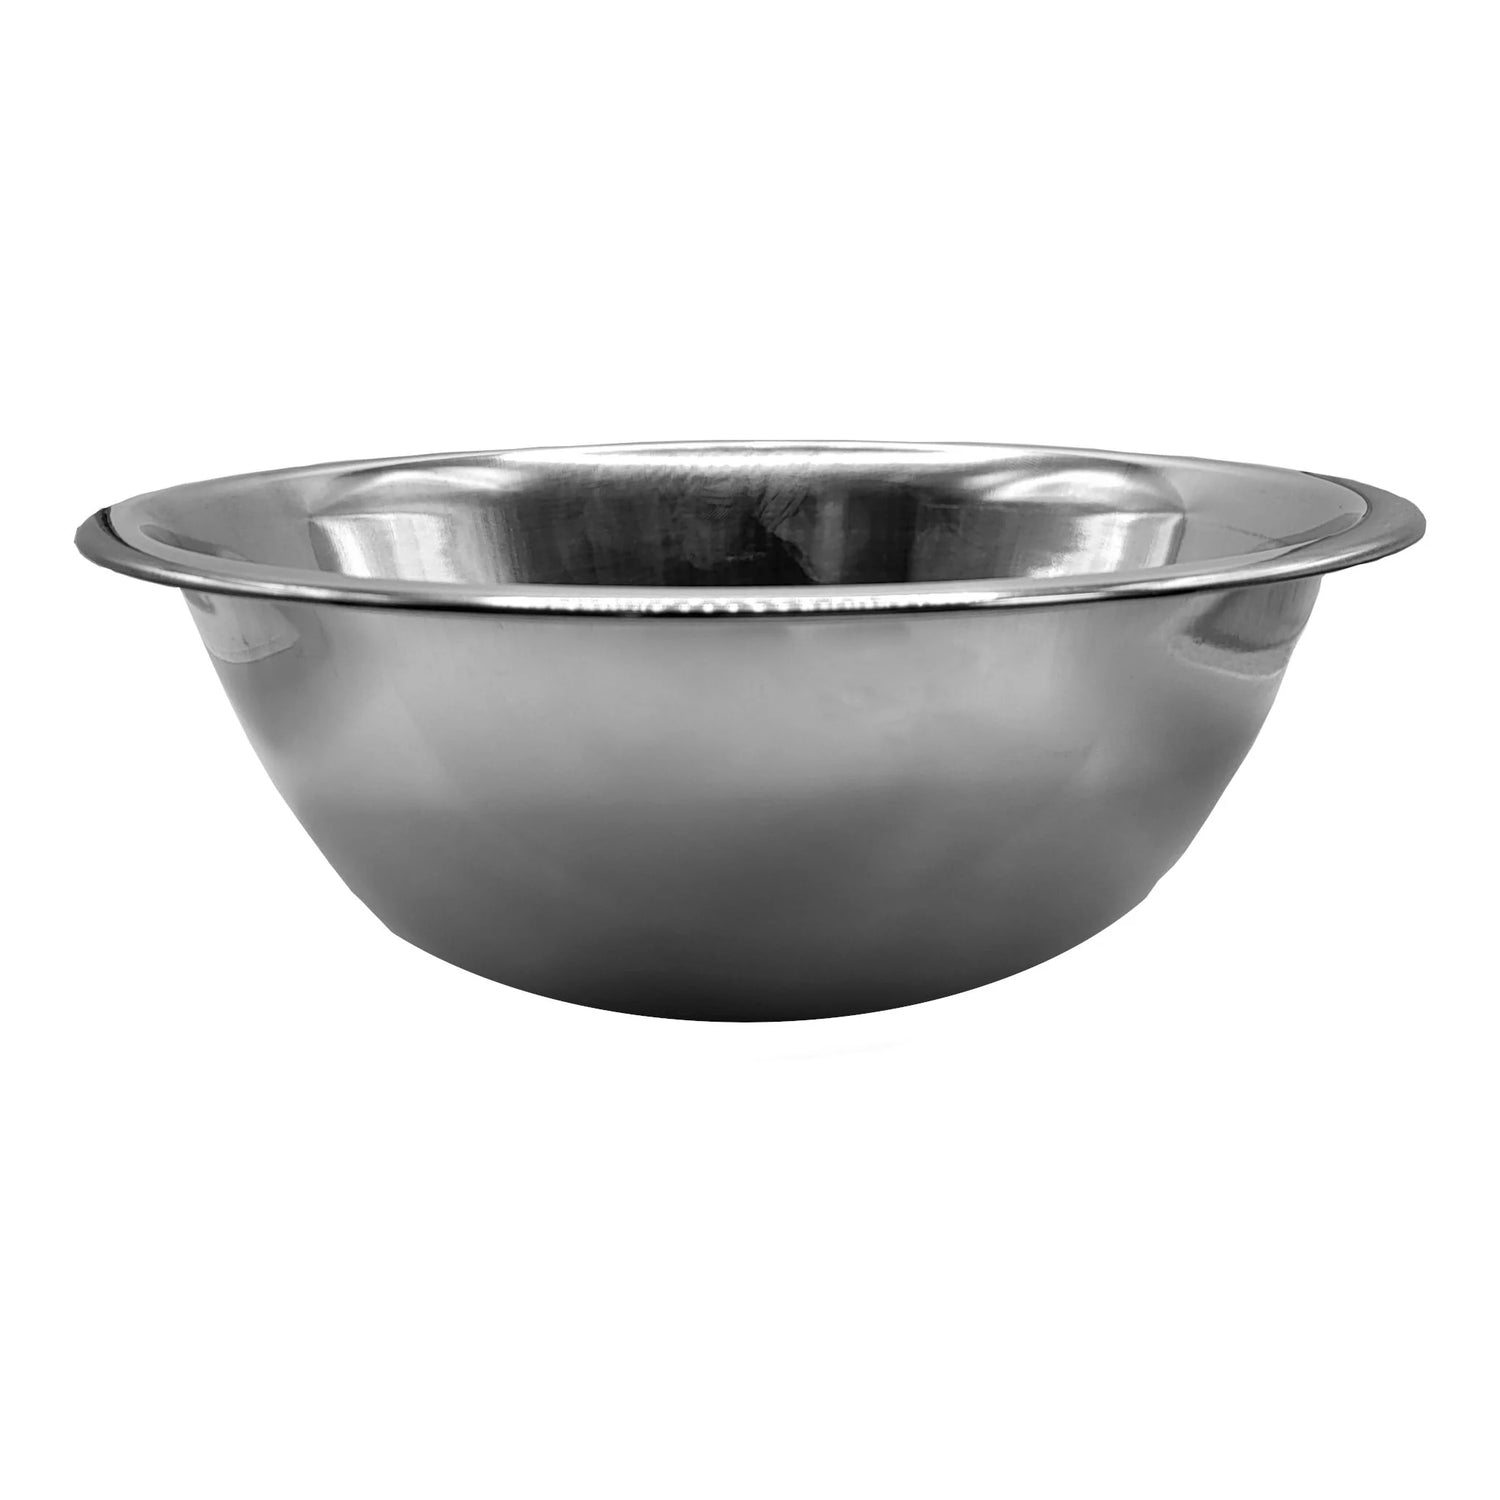 Mixing Bowl Light Stainless Steel | 20cm